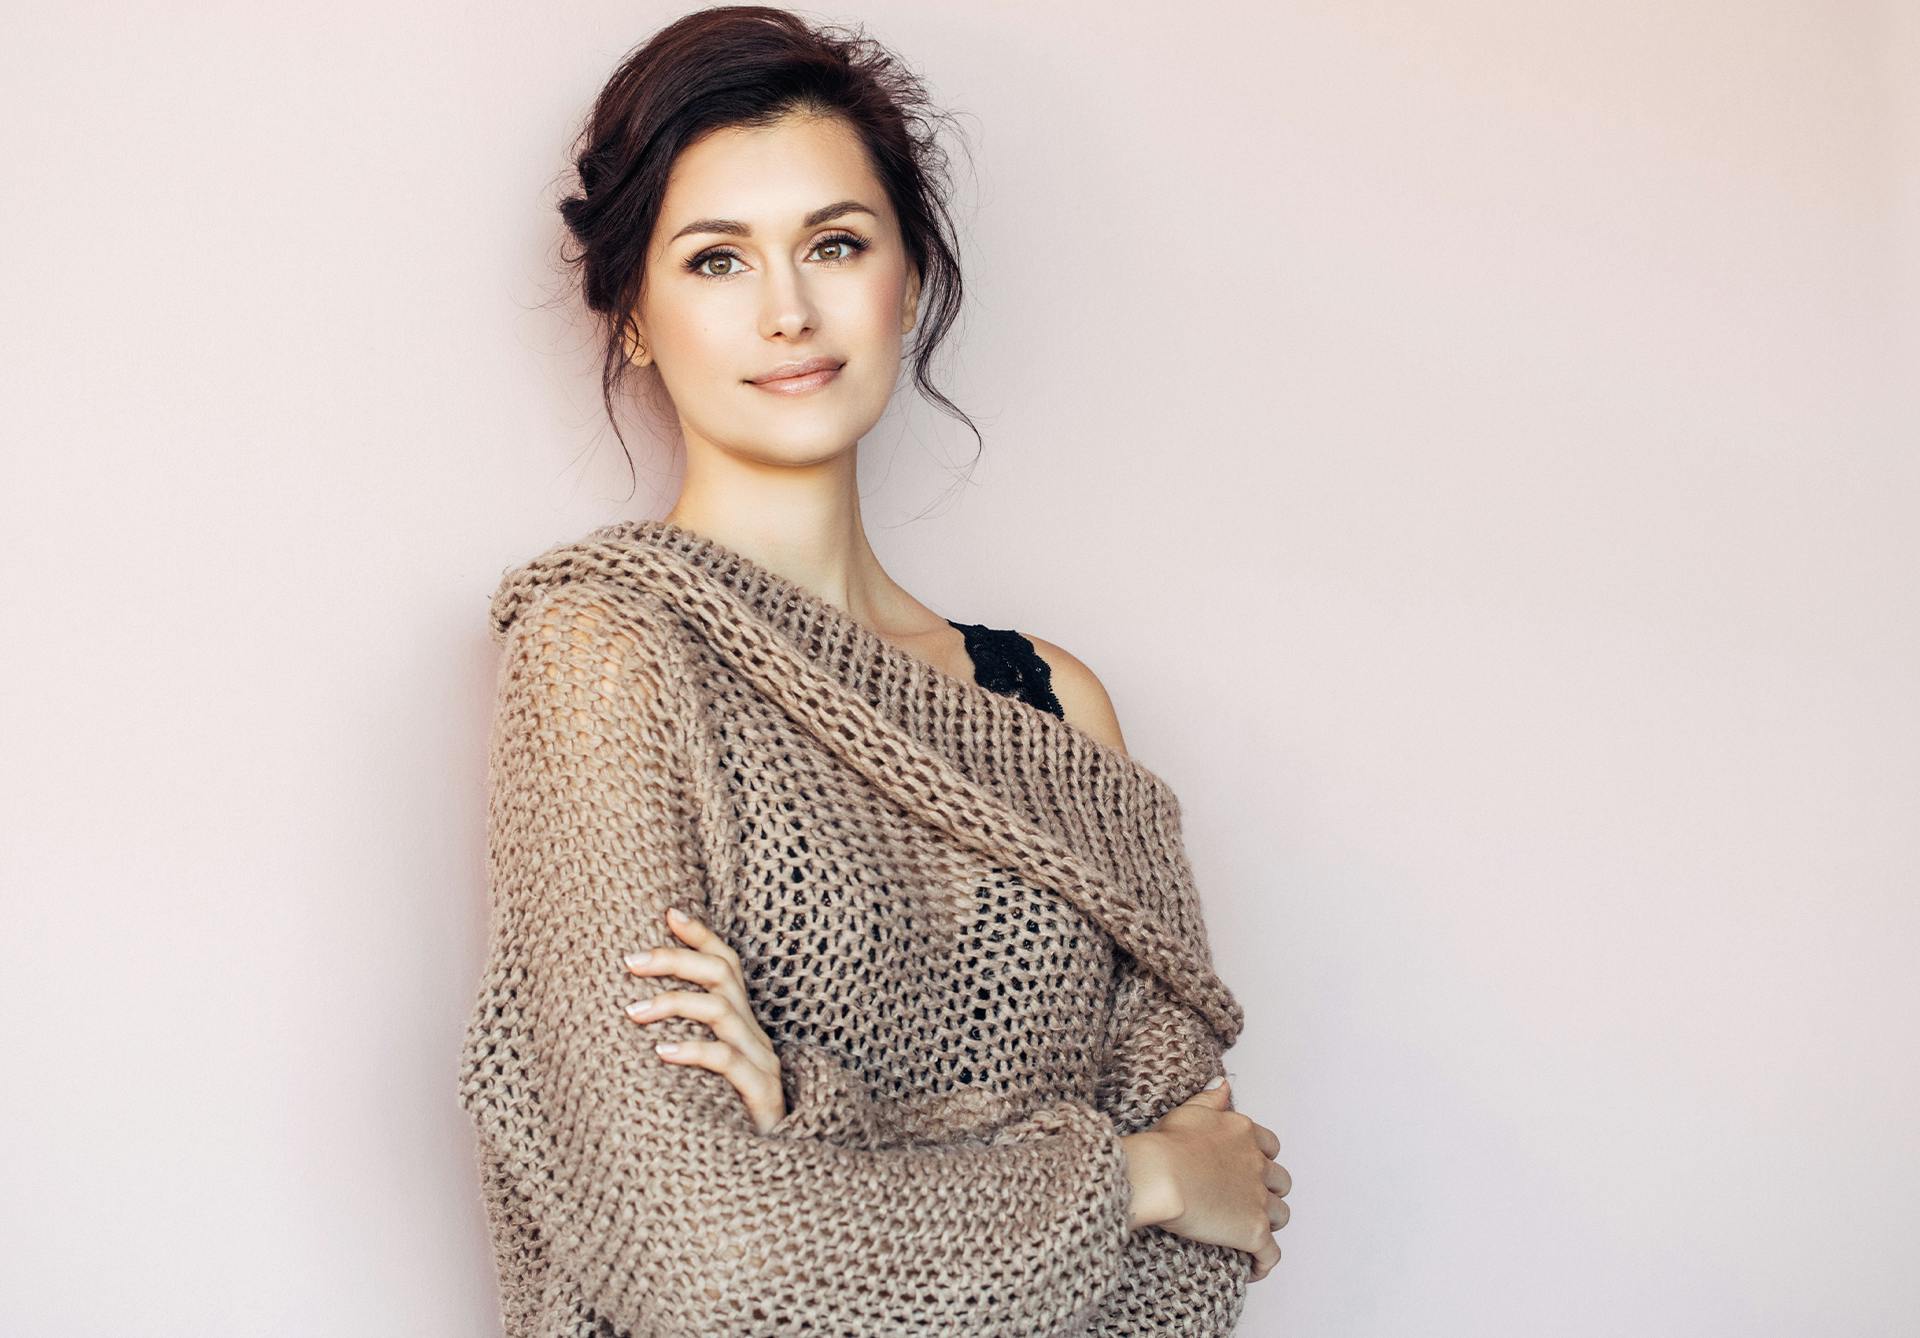 brunette woman leaning against a wall in a light brown knitted sweater